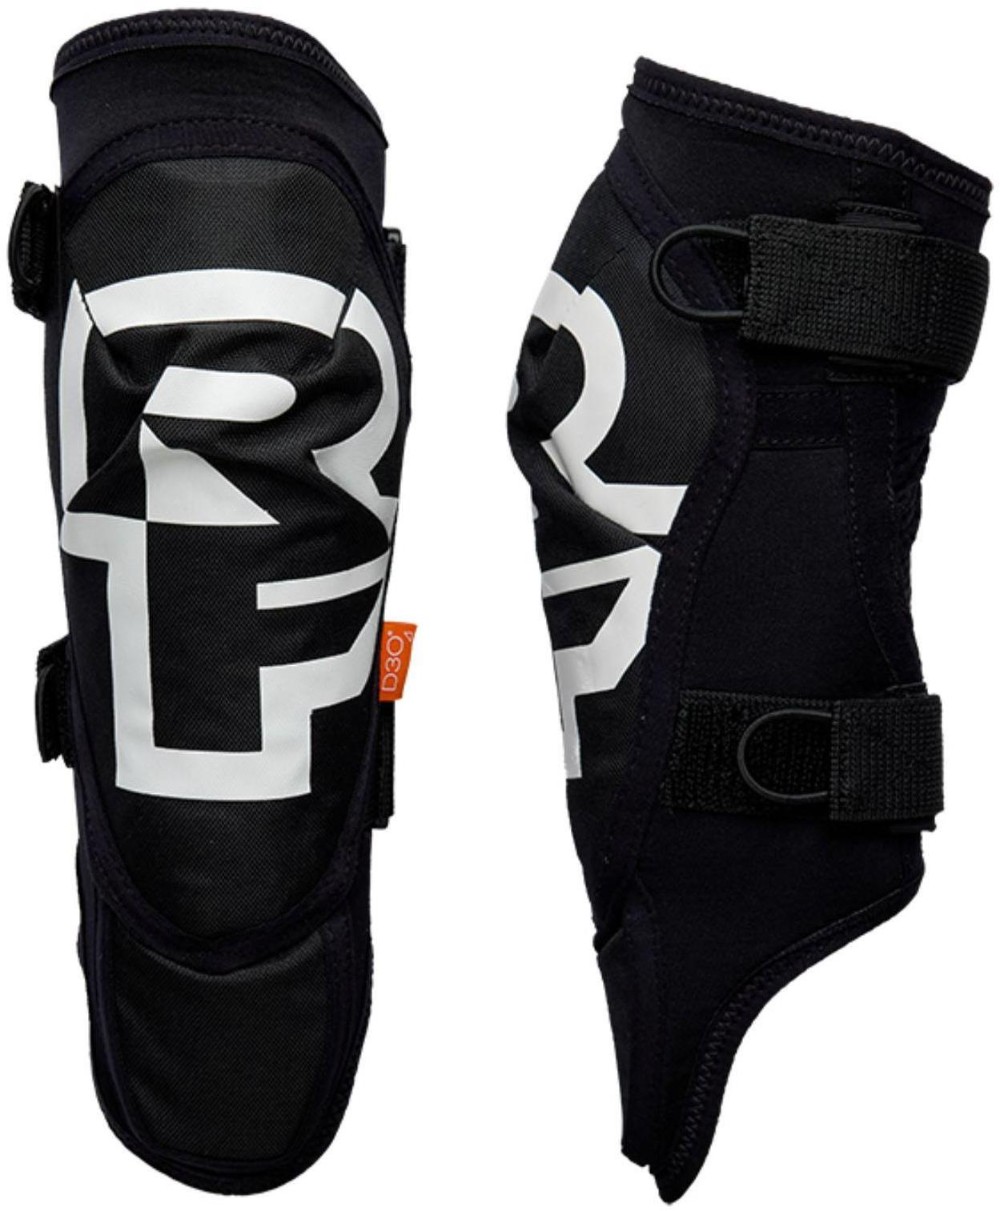 Sendy Youth Downhill Knee Guards image 0